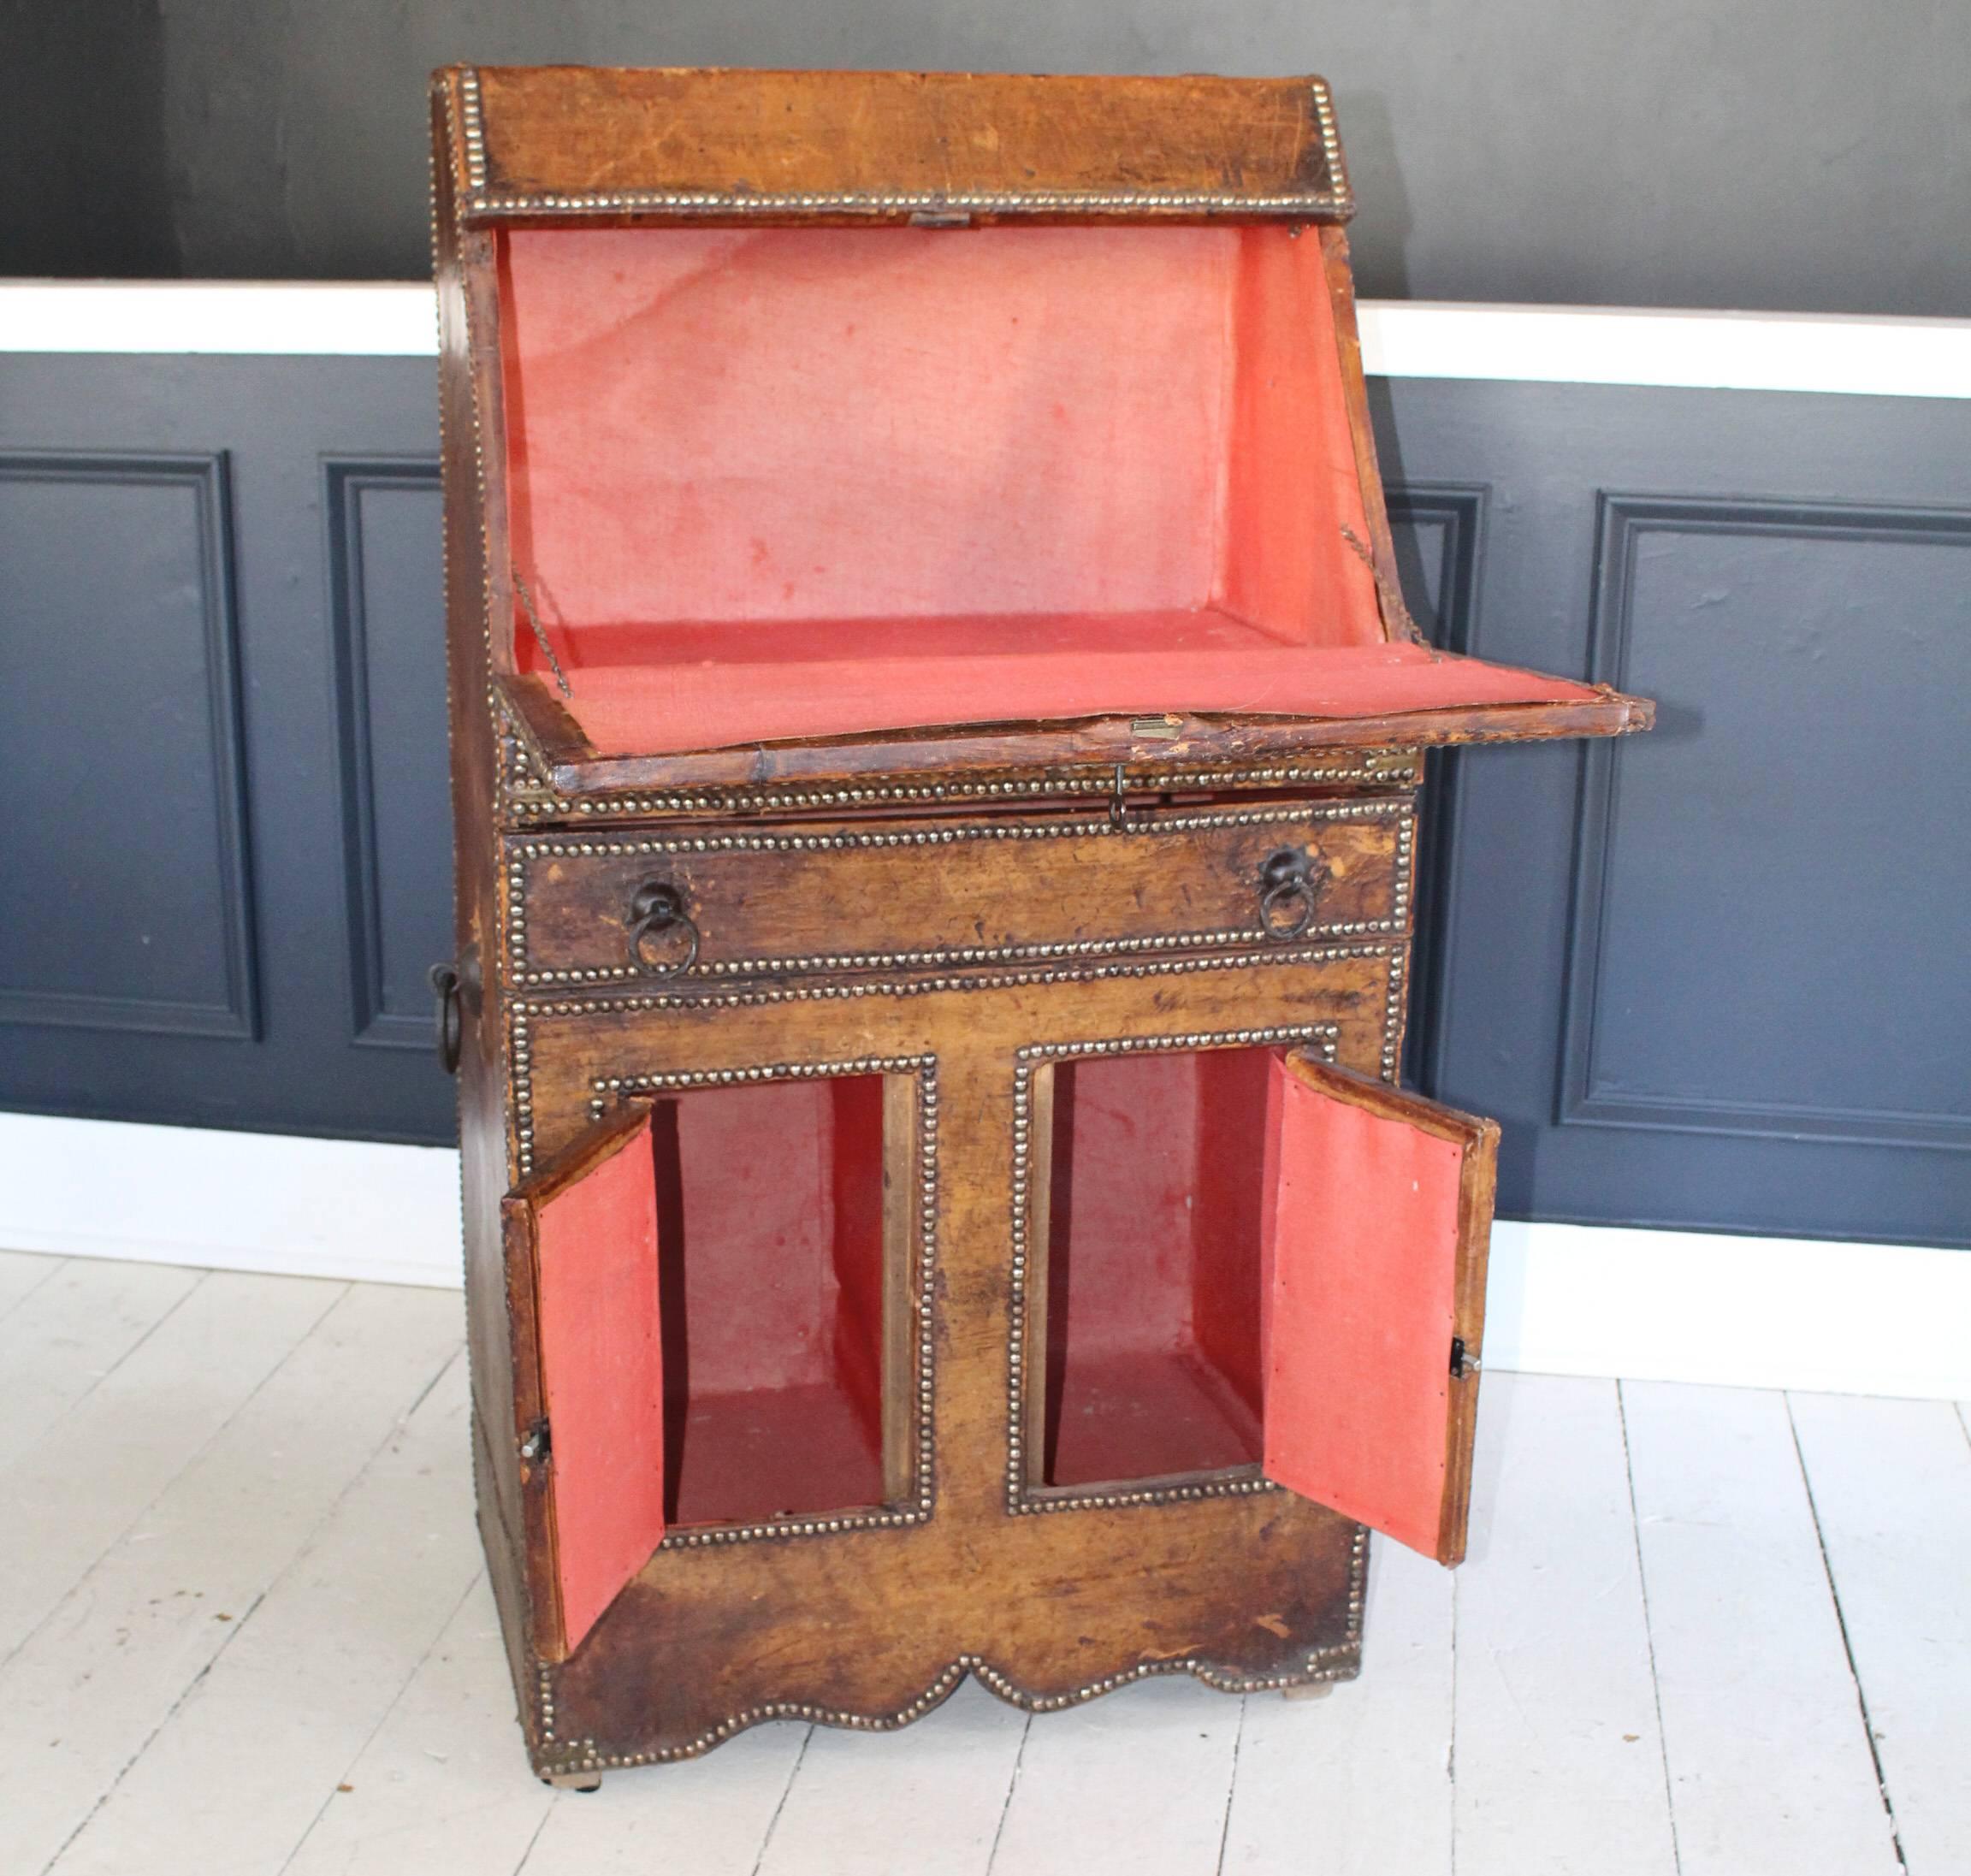 Leather slant top desk, 19th century, France, with single drawer atop two-door cabinet. Desk is outlined with nailheads. Iron ring drawer pulls and side handles add further decoration as does brass door hardware and escutcheons. Interior lined with